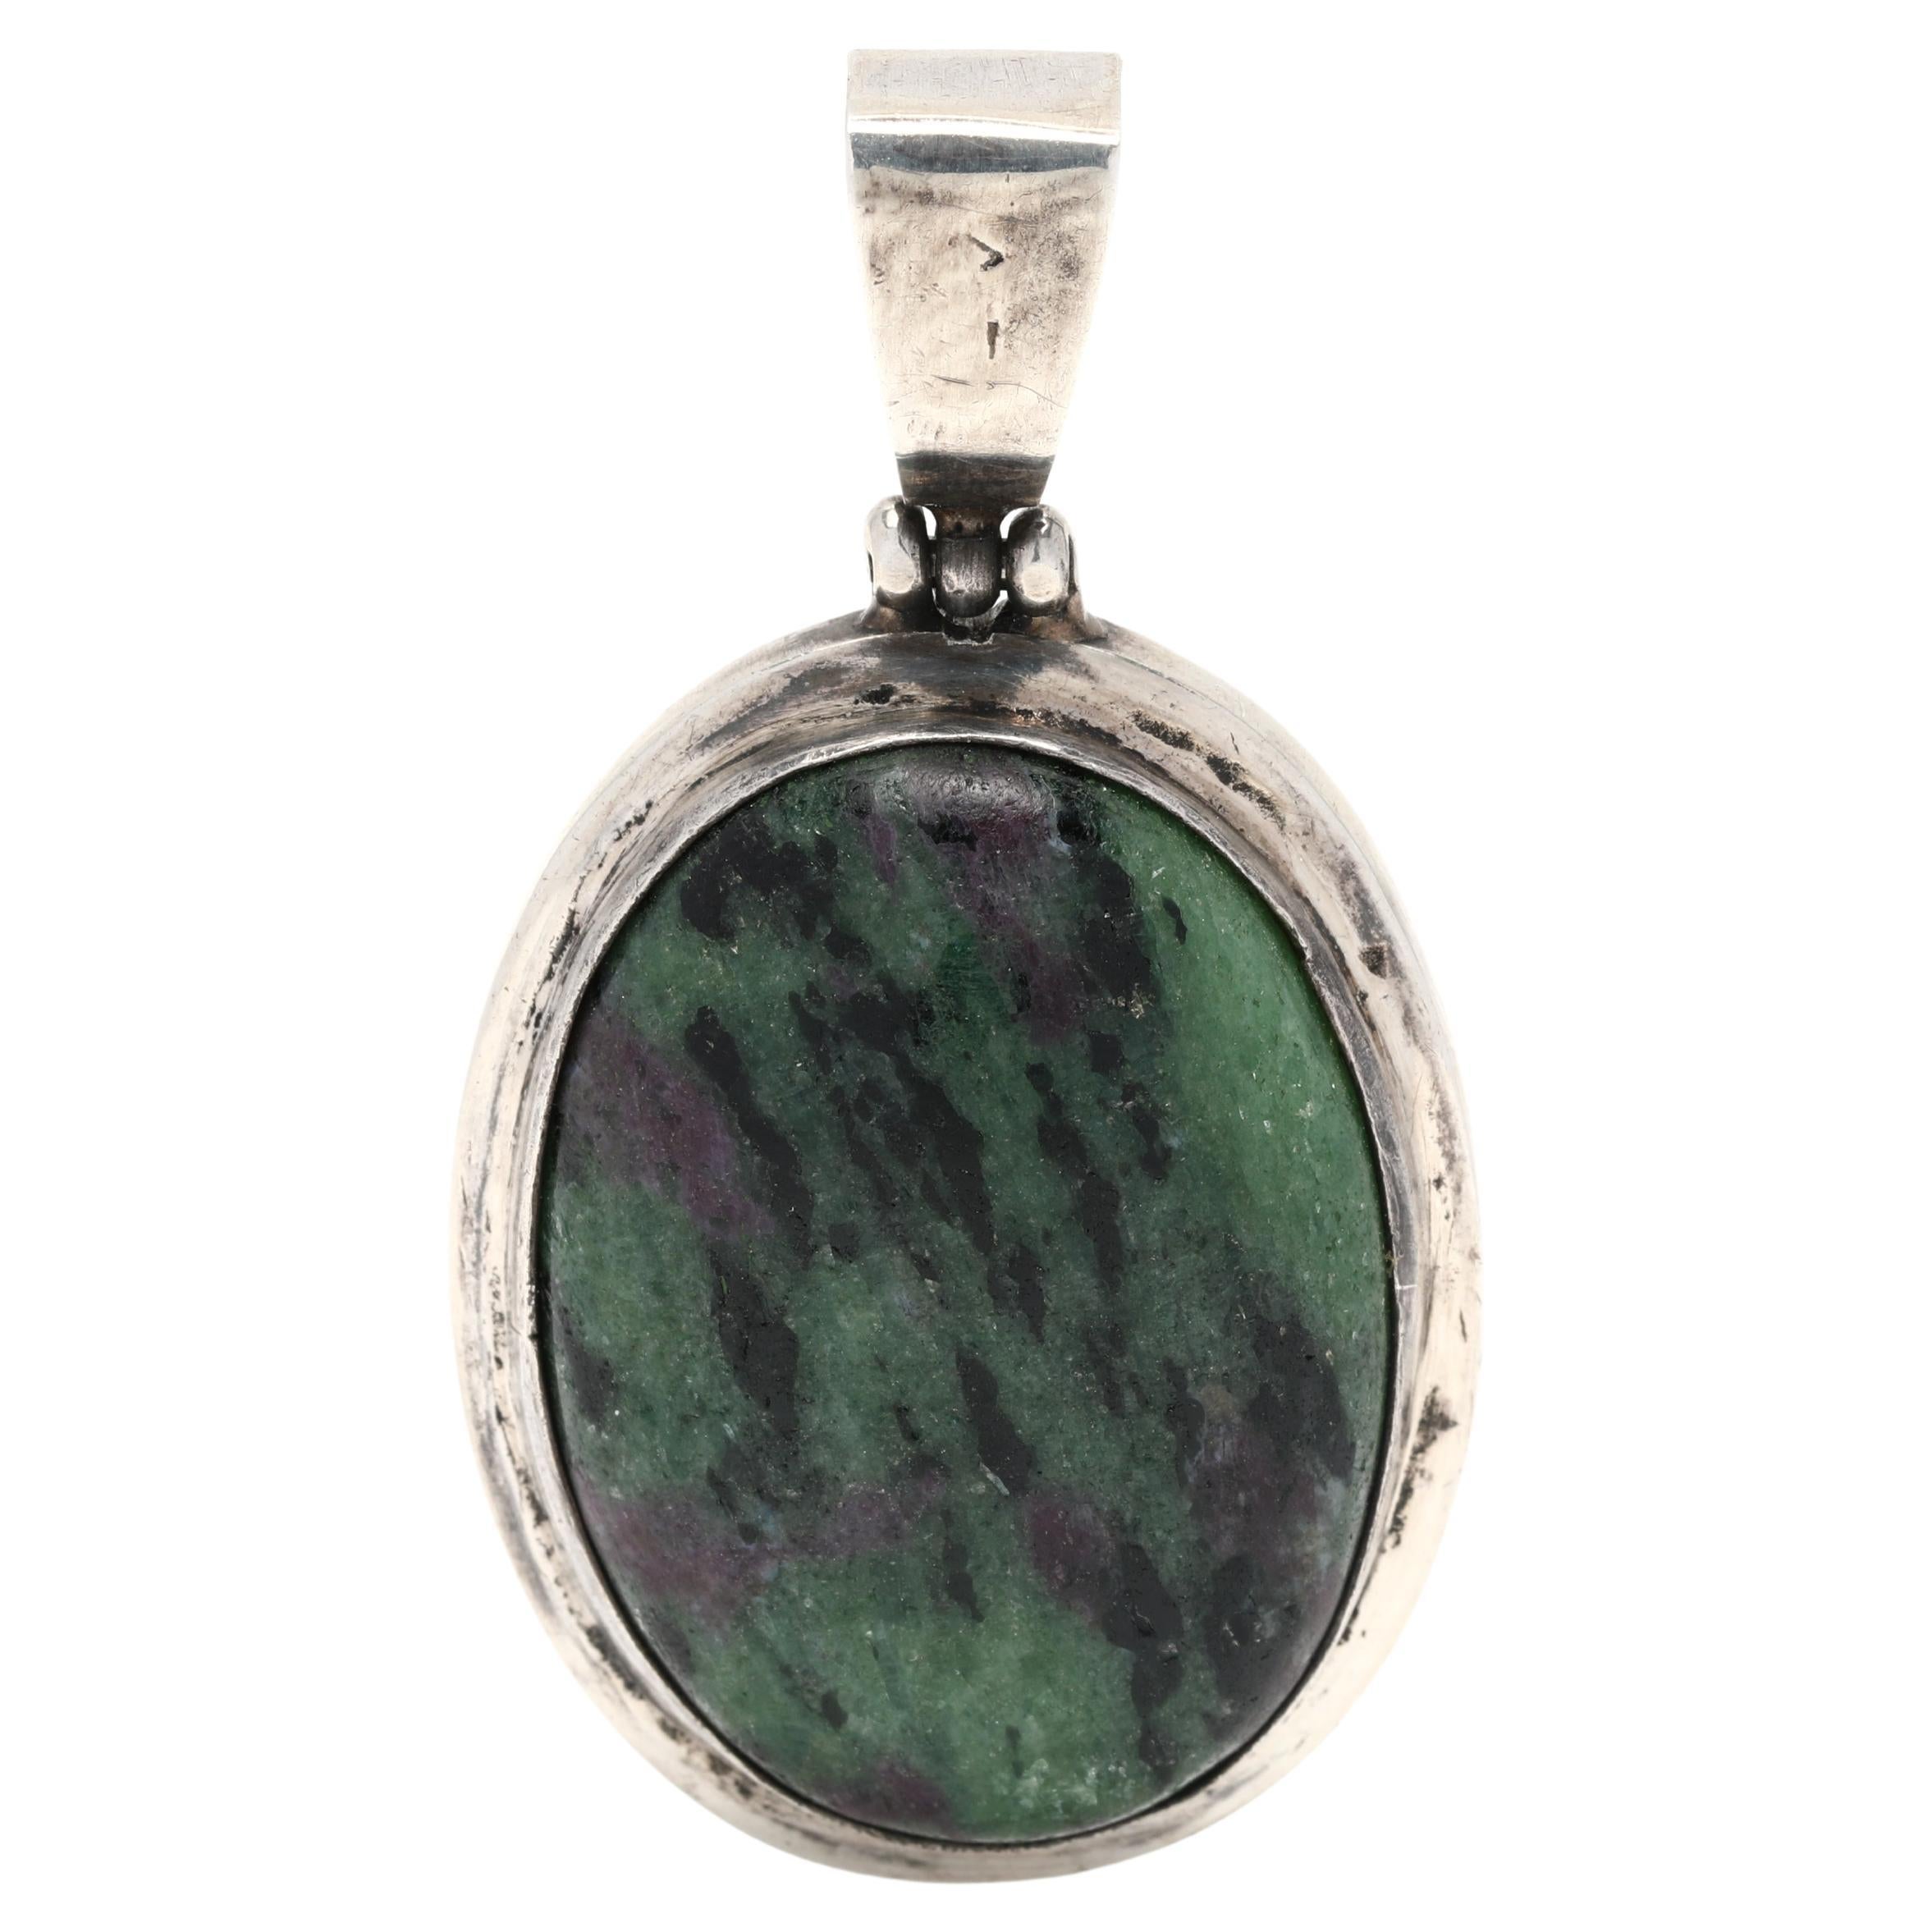 Vintage Large Ruby in Zoisite Pendentif, Sterling Silver, Longueur 2 Inches, Oval